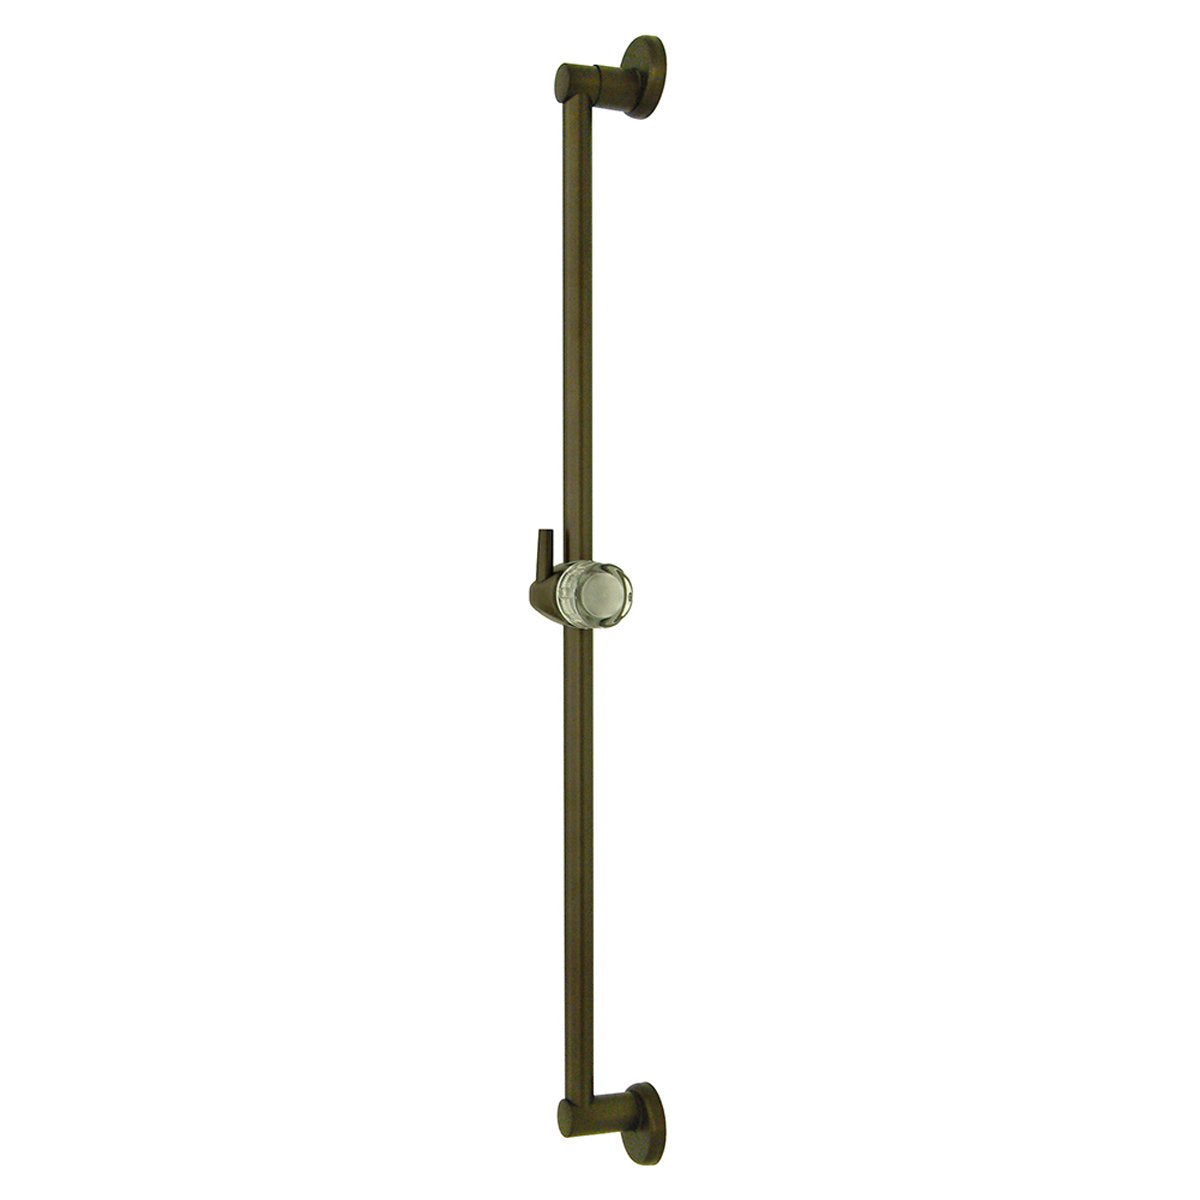 Kingston Brass Made to Match 24" Brass Made to Match Oil Rubbed Bronze Slide Bar with Pin-Bathroom Accessories-Free Shipping-Directsinks.